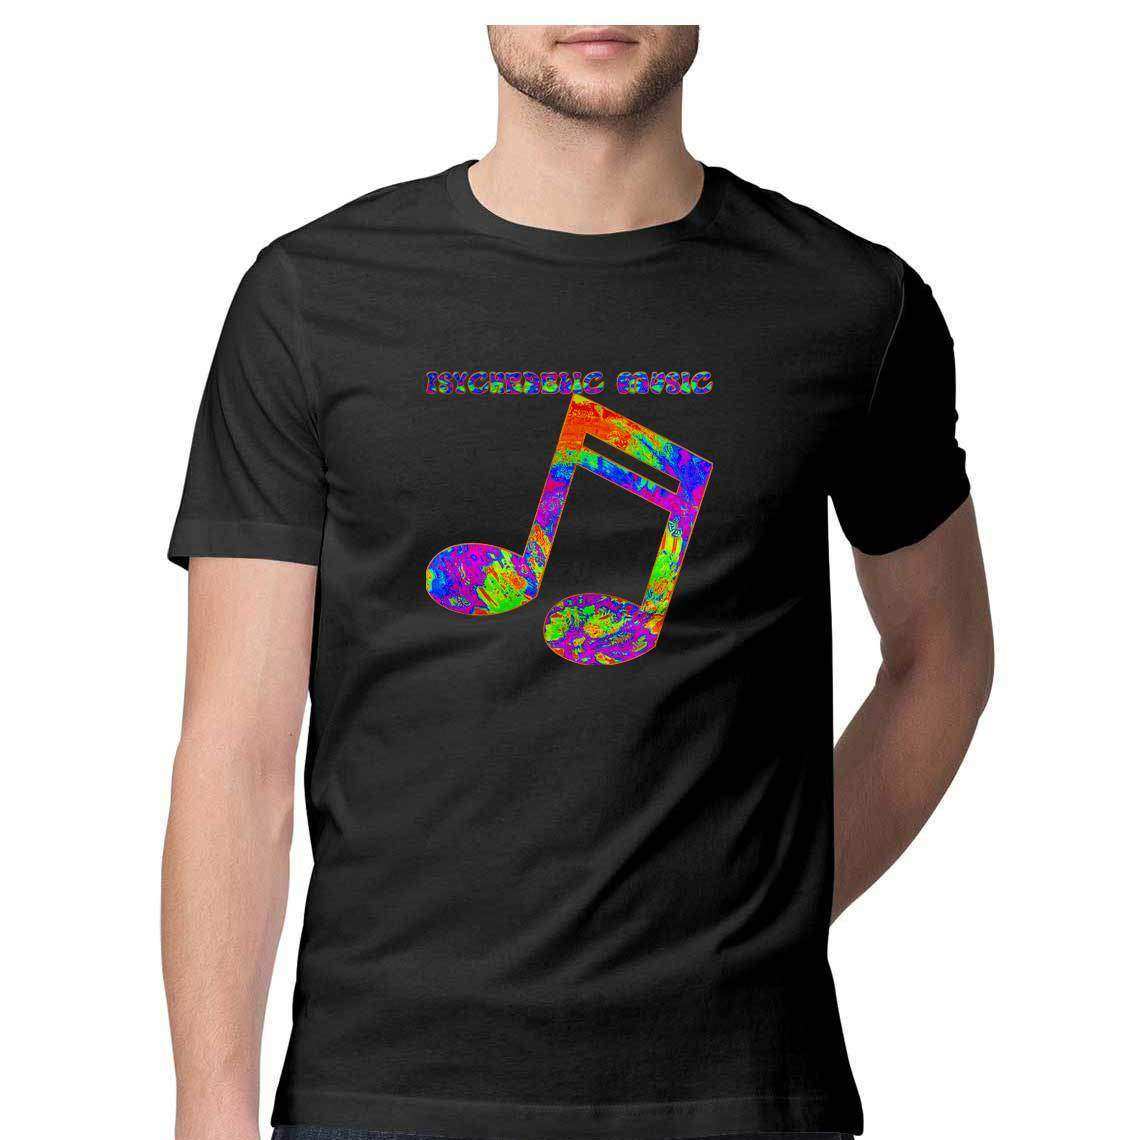 Psychedelic Groove T-Shirt Men's T-Shirt - CBD Store India